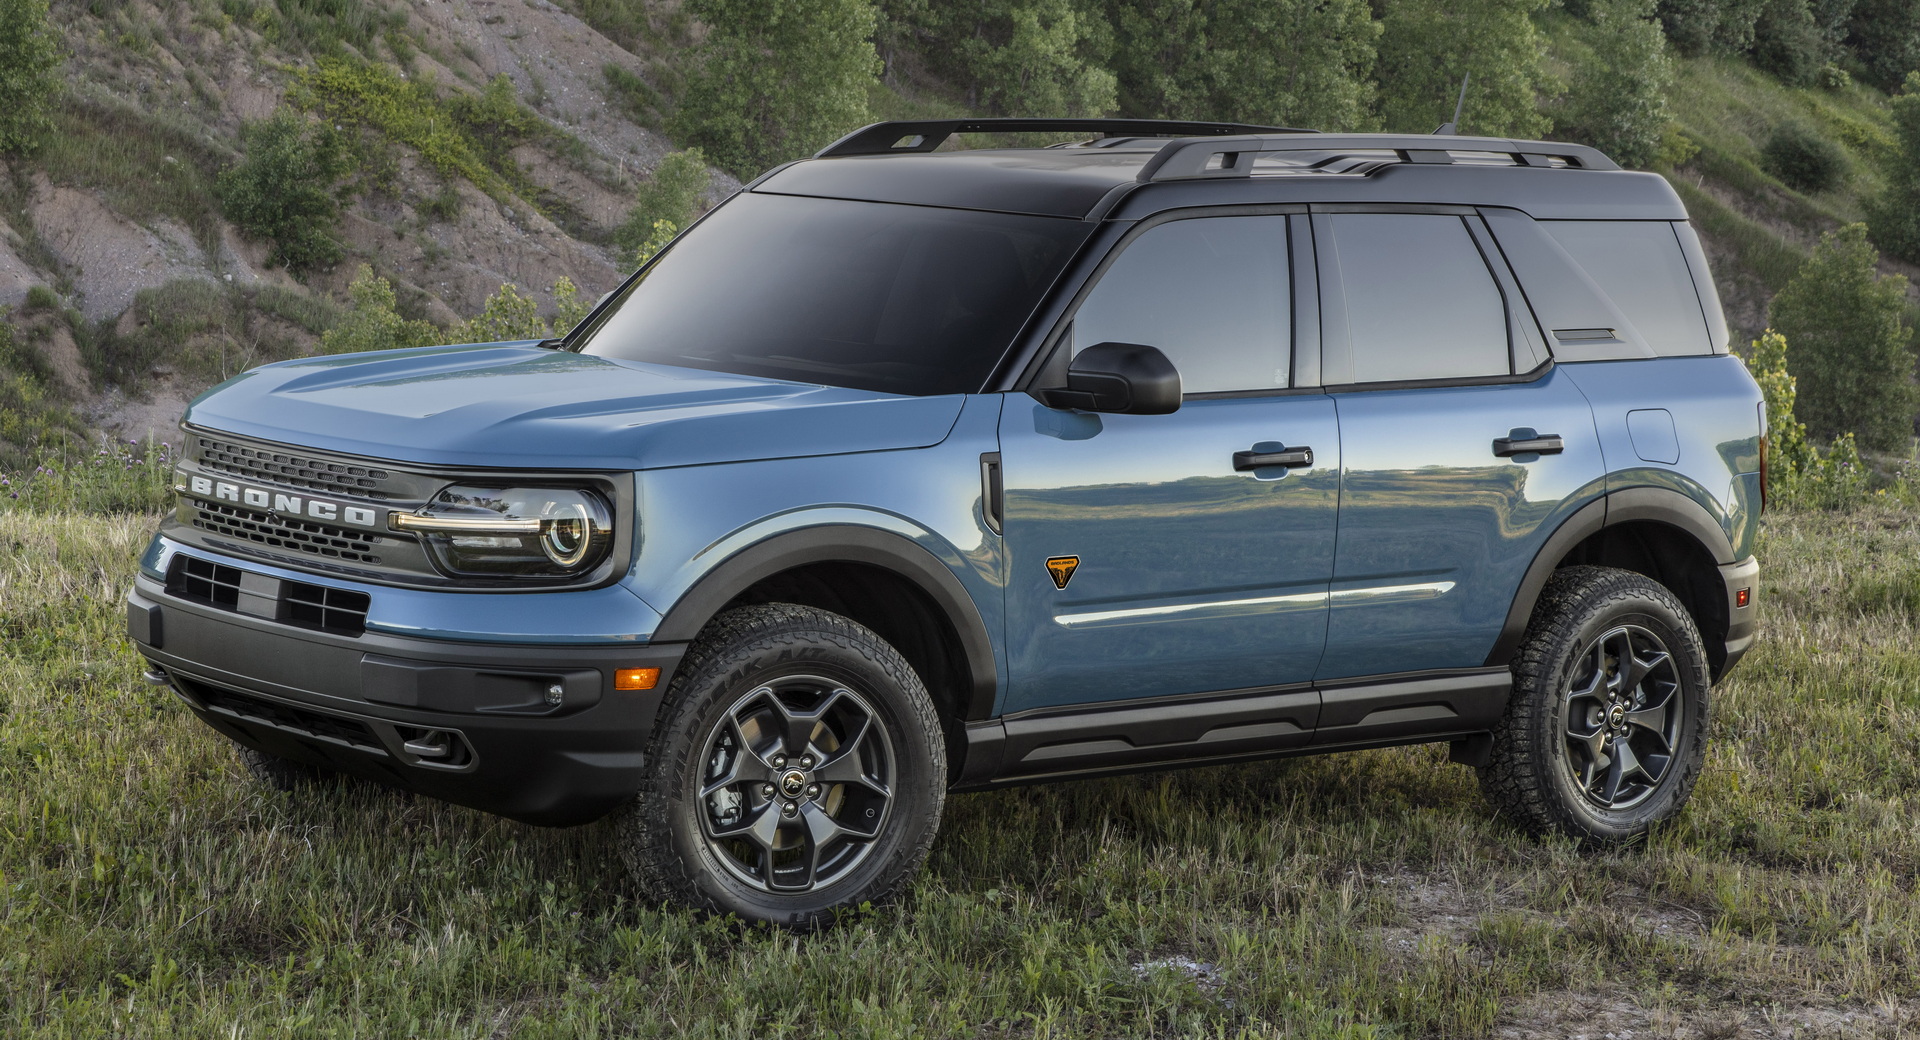 2022 Ford Bronco Sport Prices Hiked By Up To $575 | Carscoops